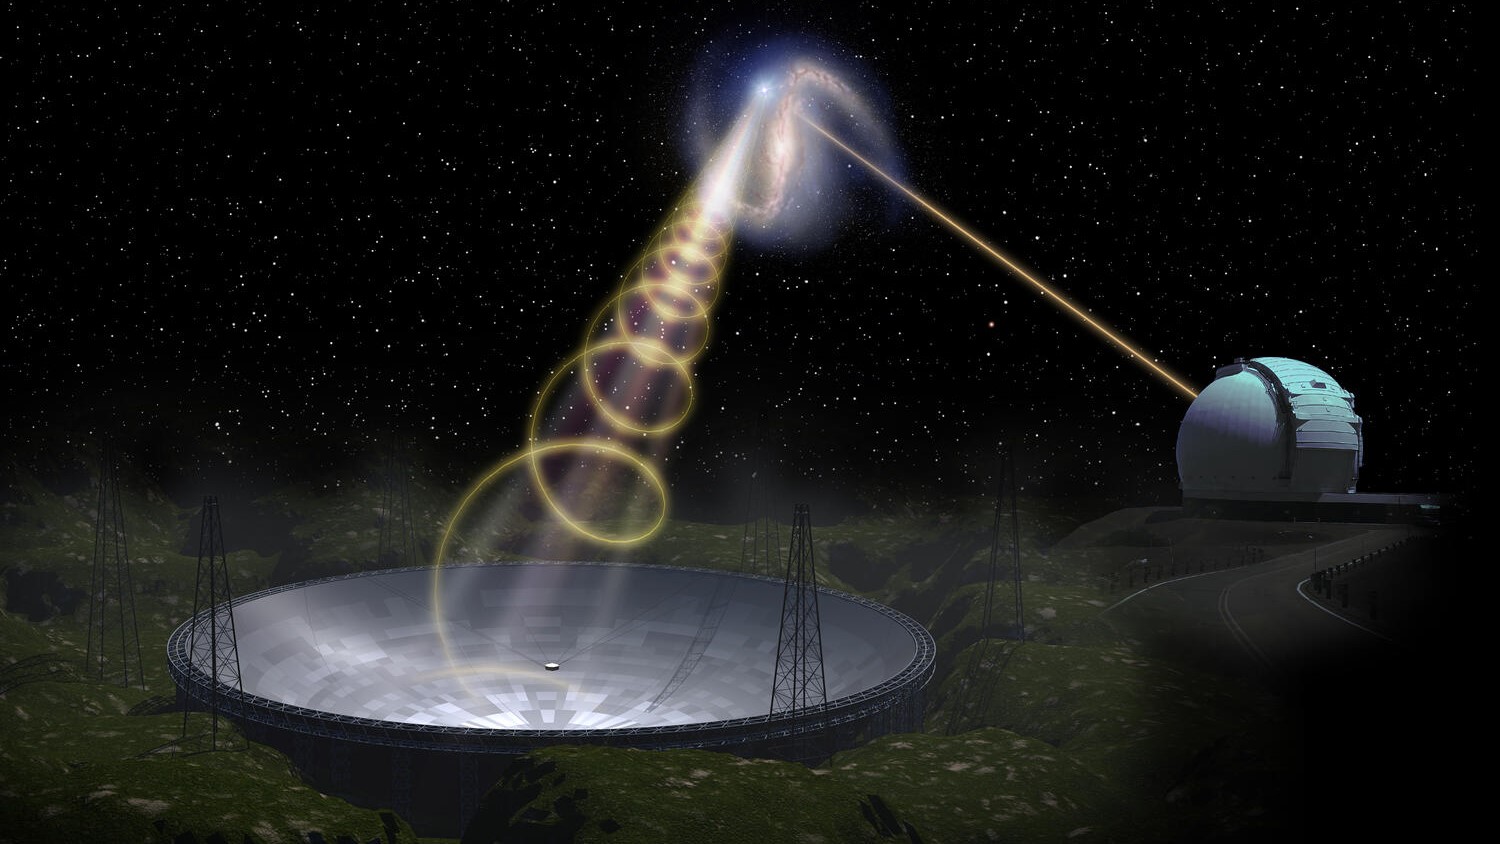 Illustration of a telescope dish with spirals emanating from space into the dish, indicating a Radio Rust burst signal